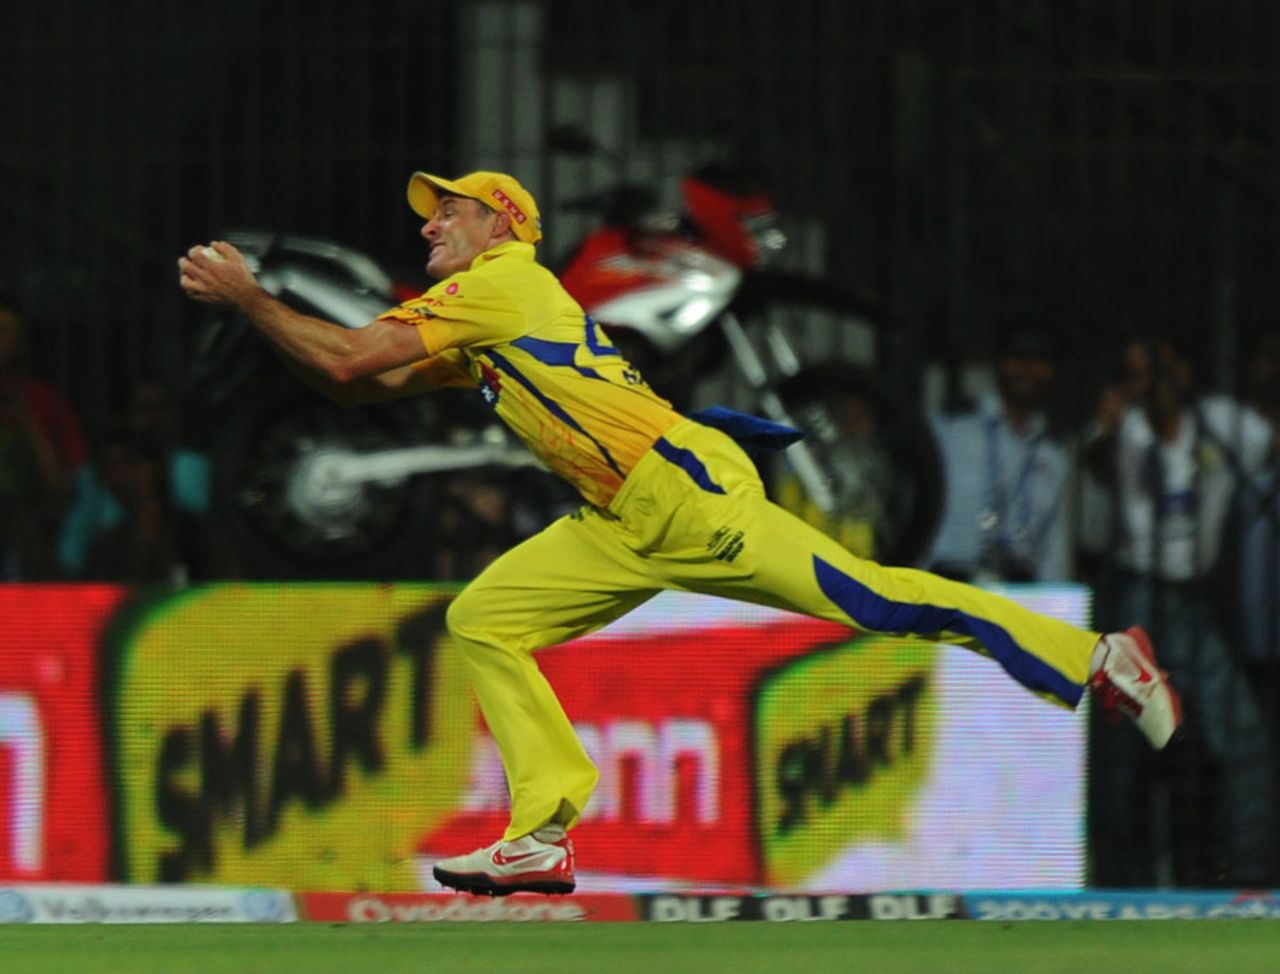 Michael Hussey completes the catch that sent back Virender Sehwag, Delhi Daredevils v Chennai Super Kings, 2nd eliminator, IPL 2012, Chennai, May 25, 2012